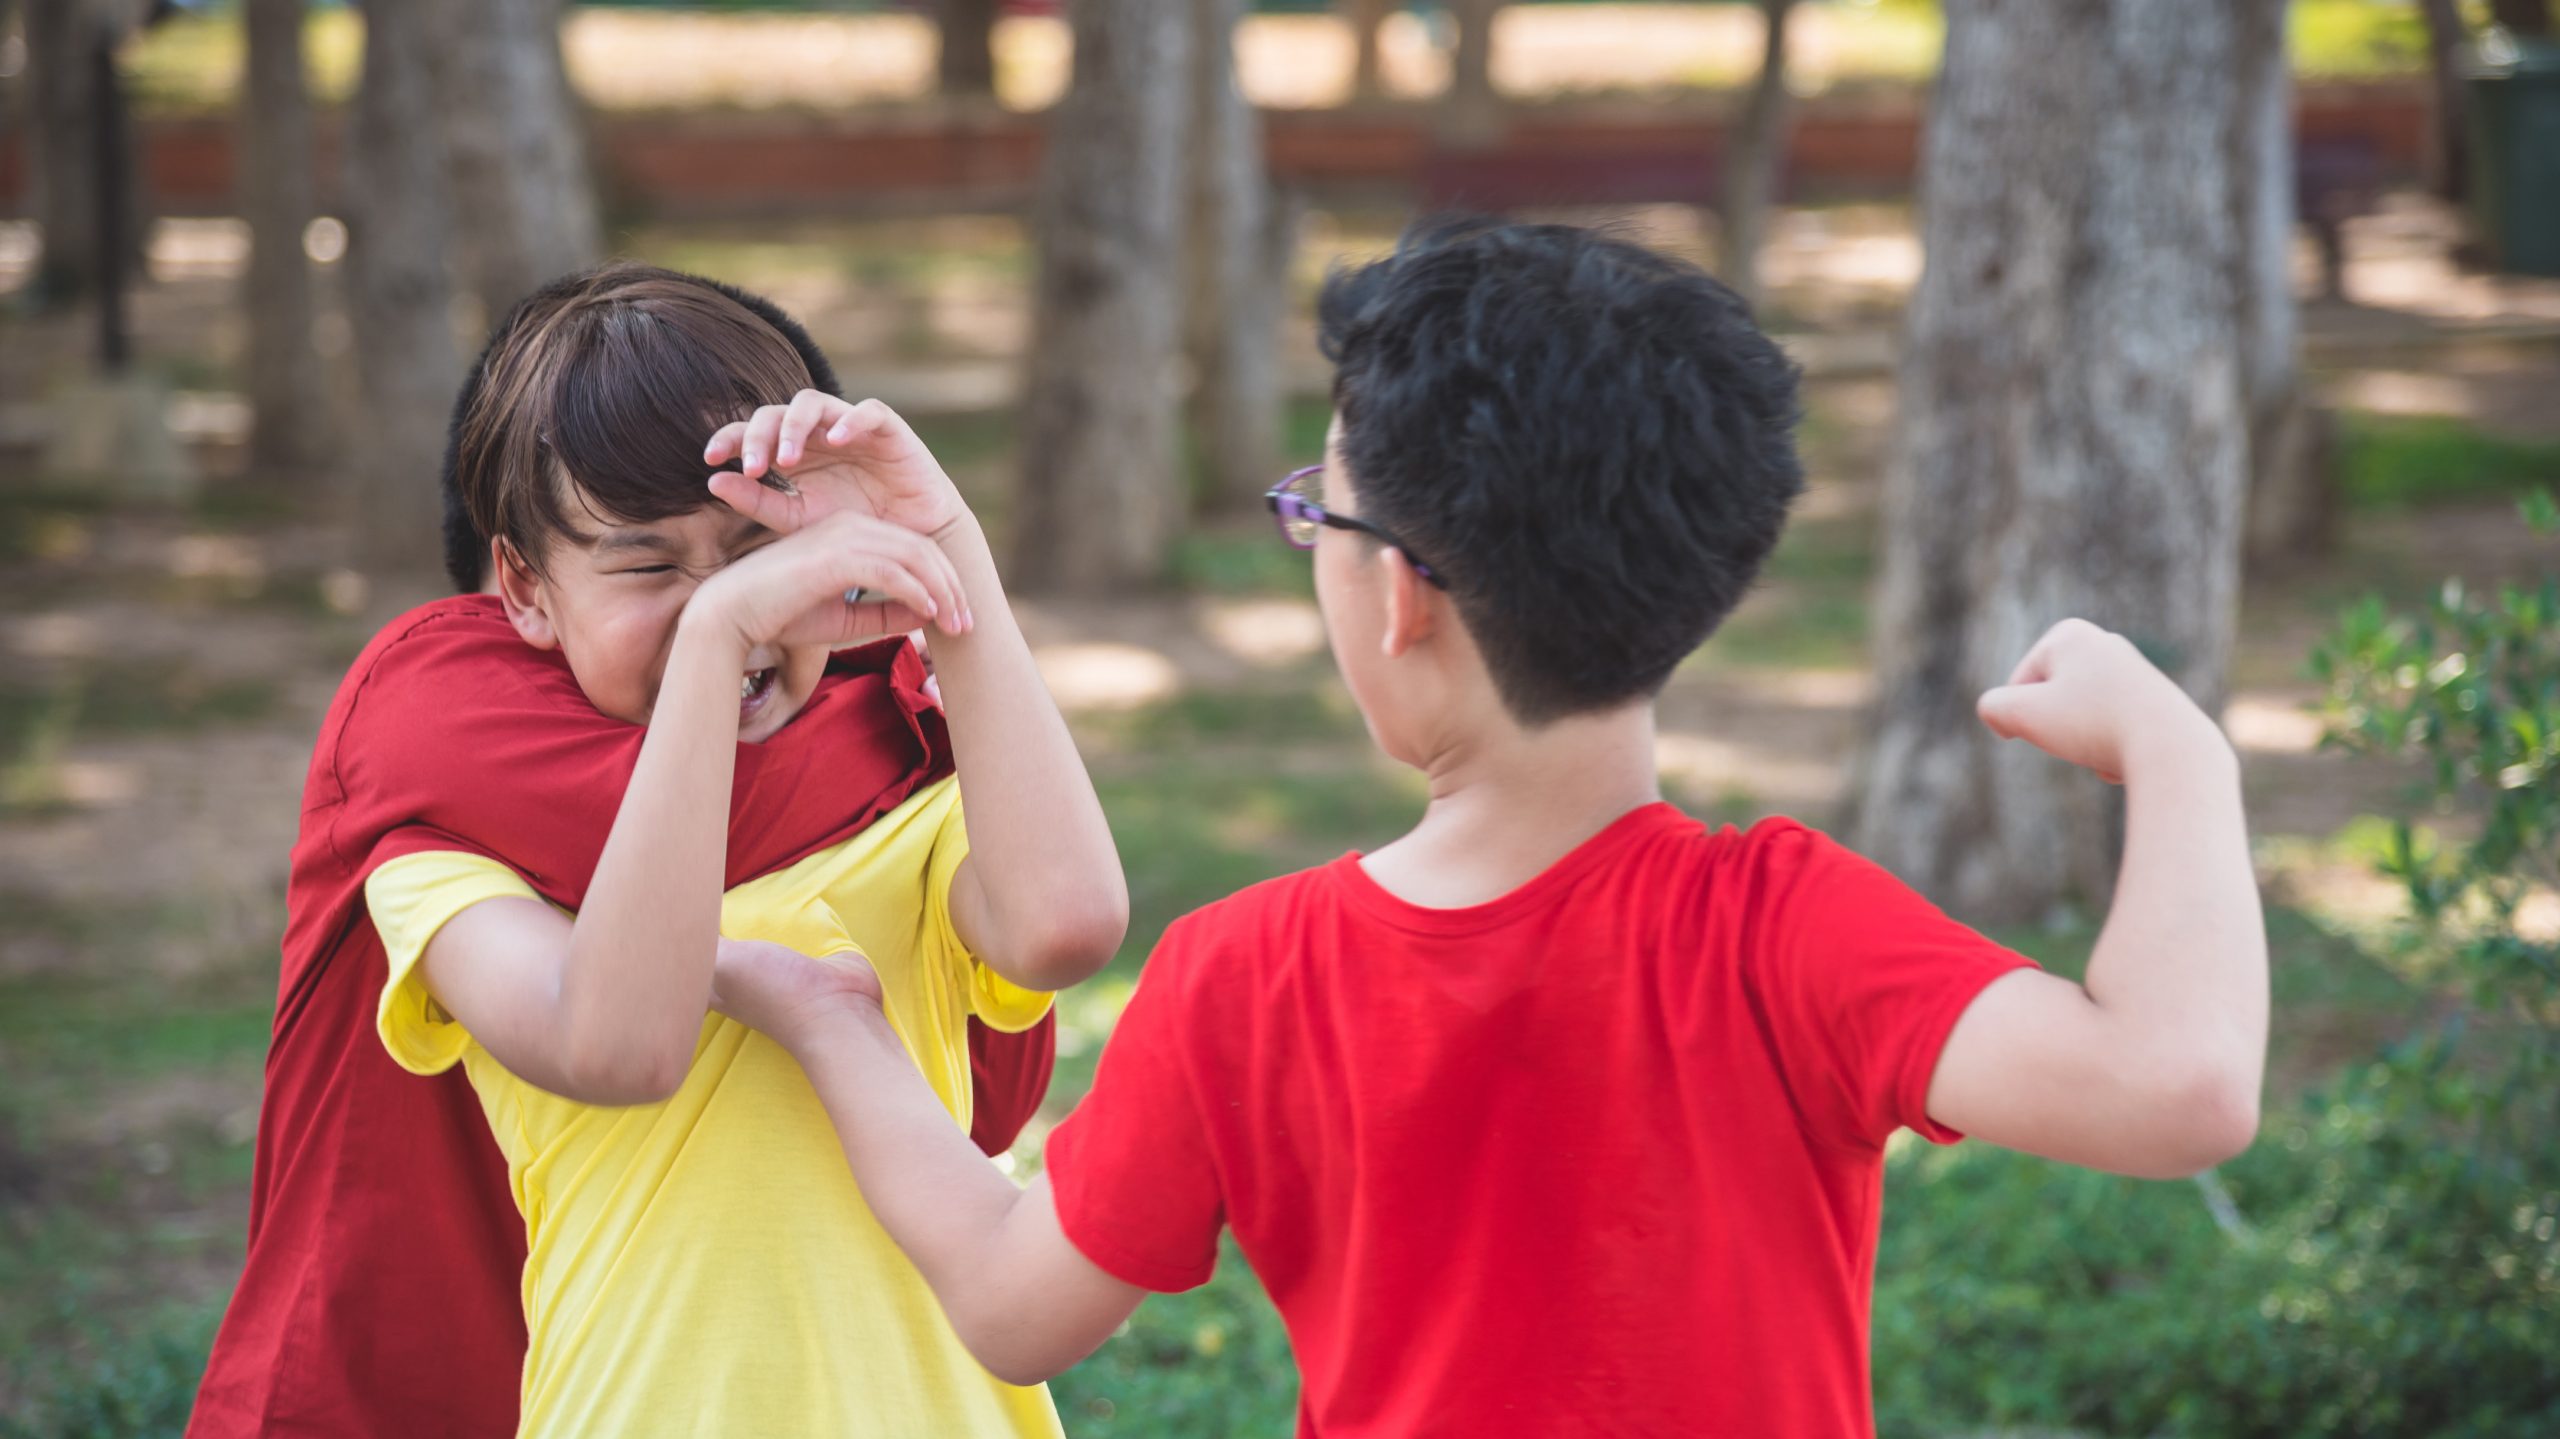 STOP THE CYCLE OF BULLYING: HOW TO HELP YOUR CHILD OVERCOME HURTFUL BEHAVIORS